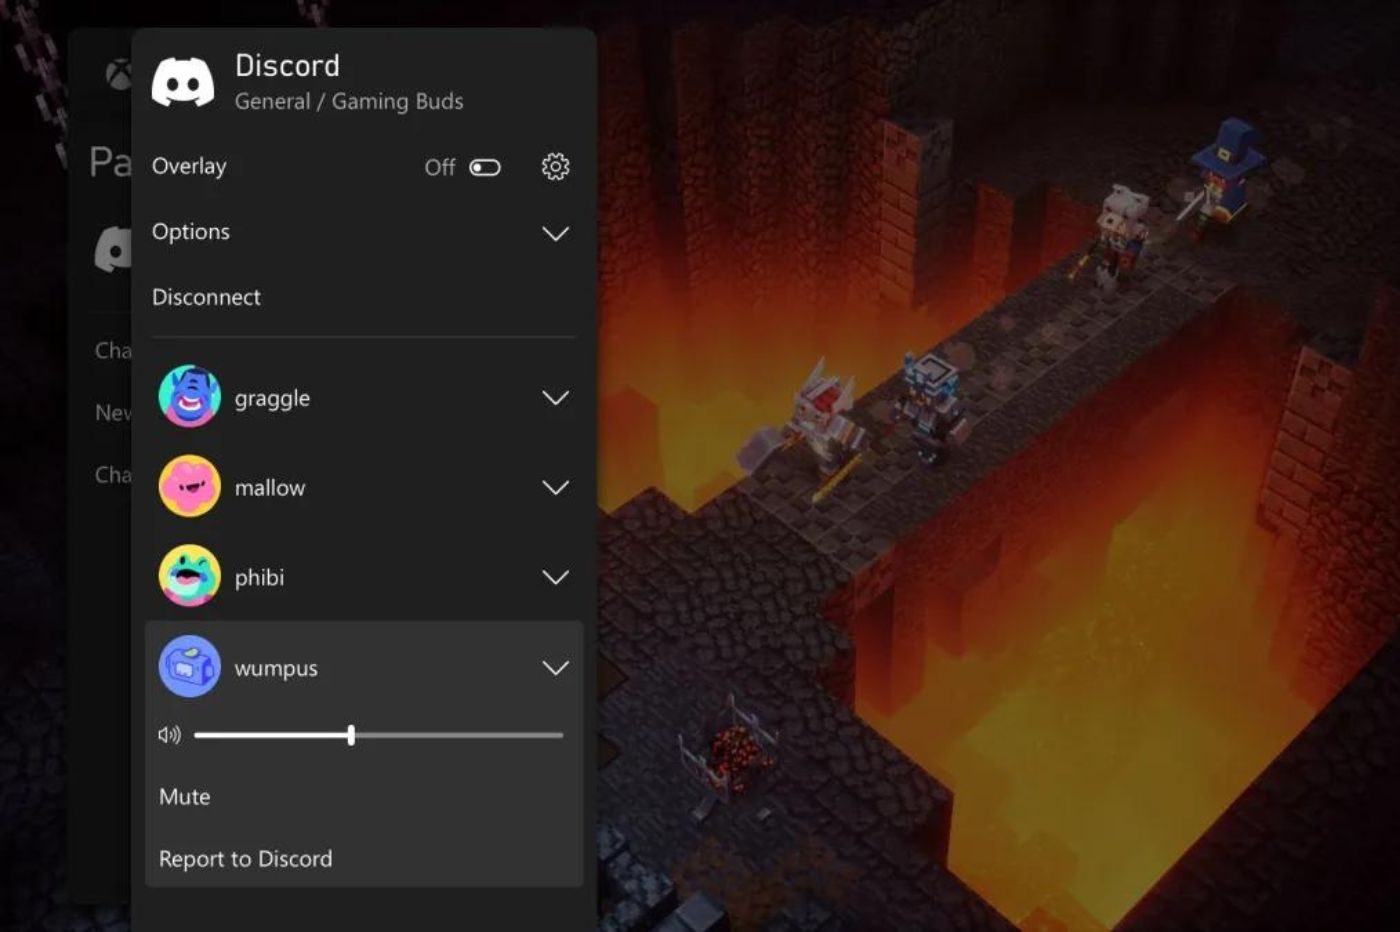 Here is the integrated interface of Discord on Xbox 